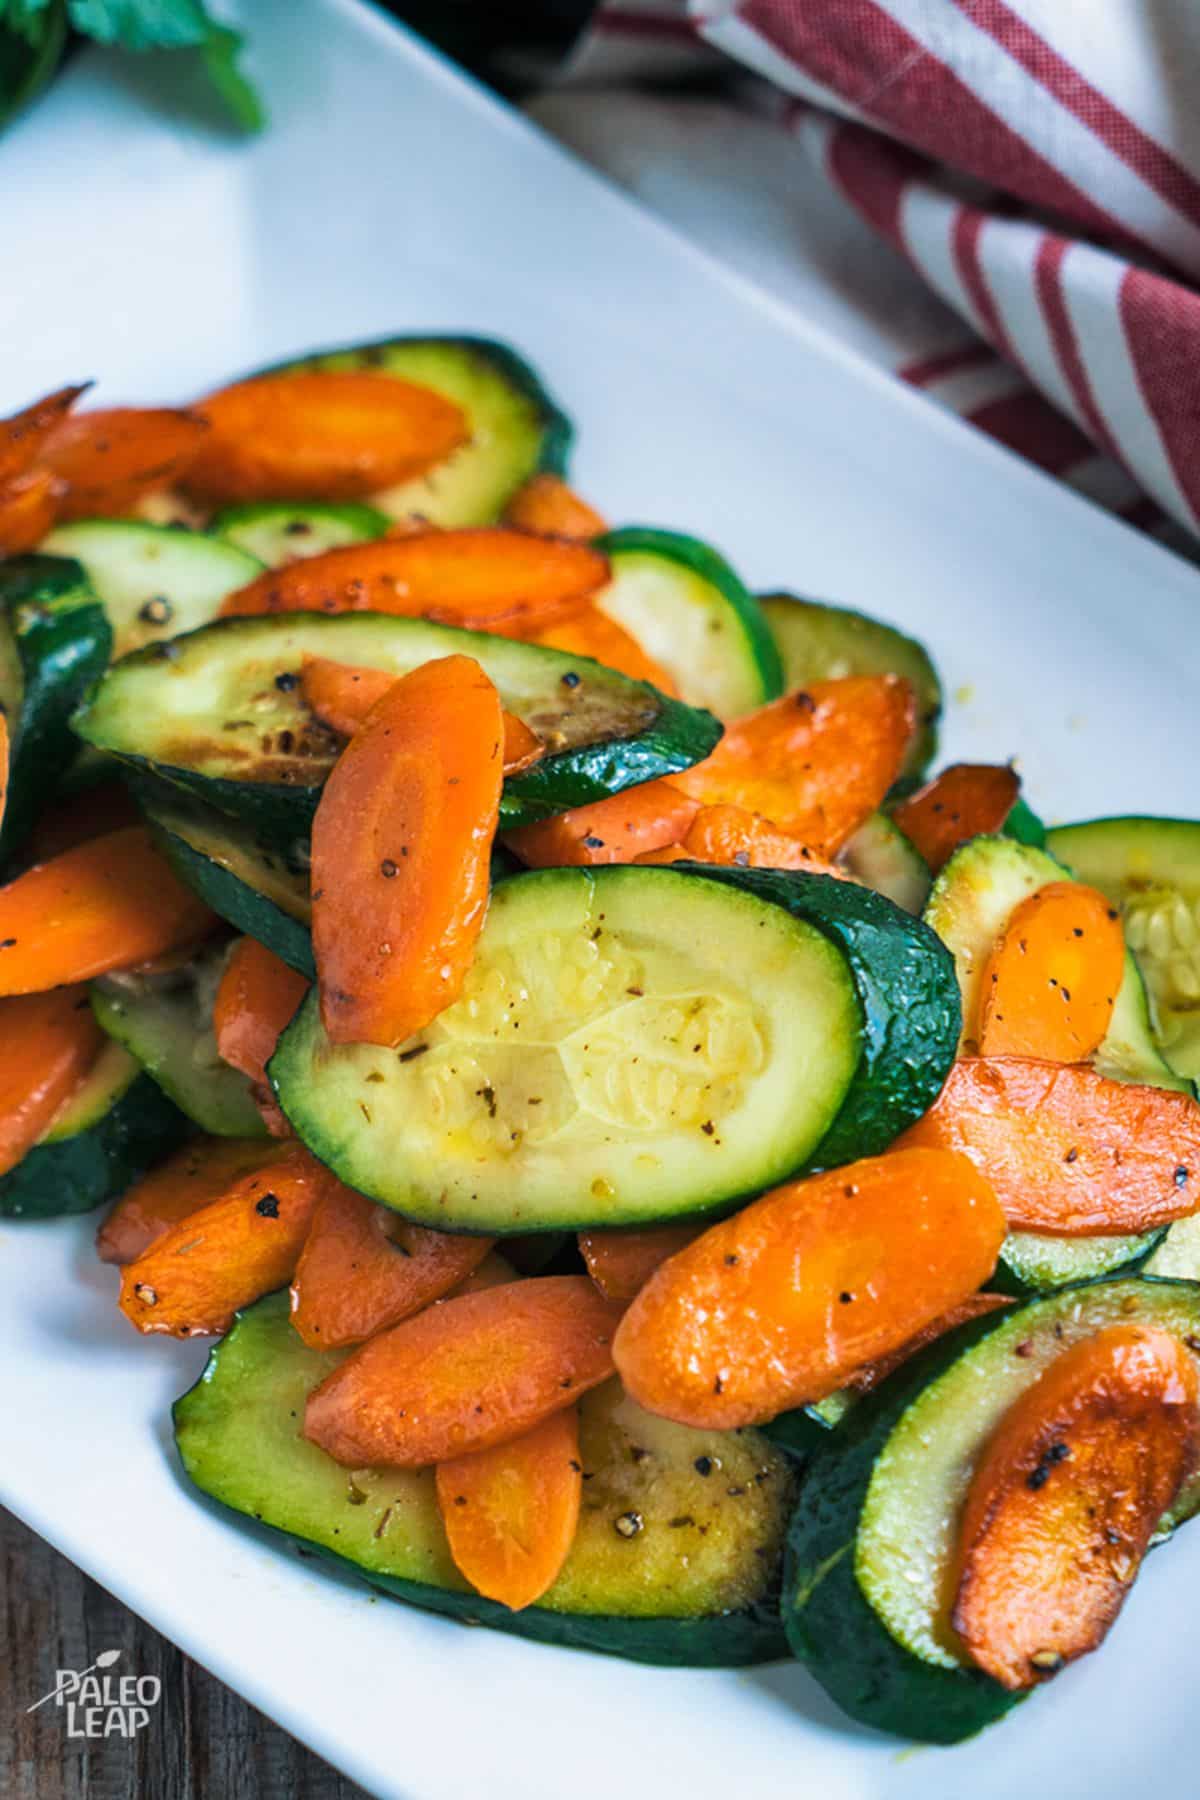 Sautéed Carrots And Zucchini on a white plate.